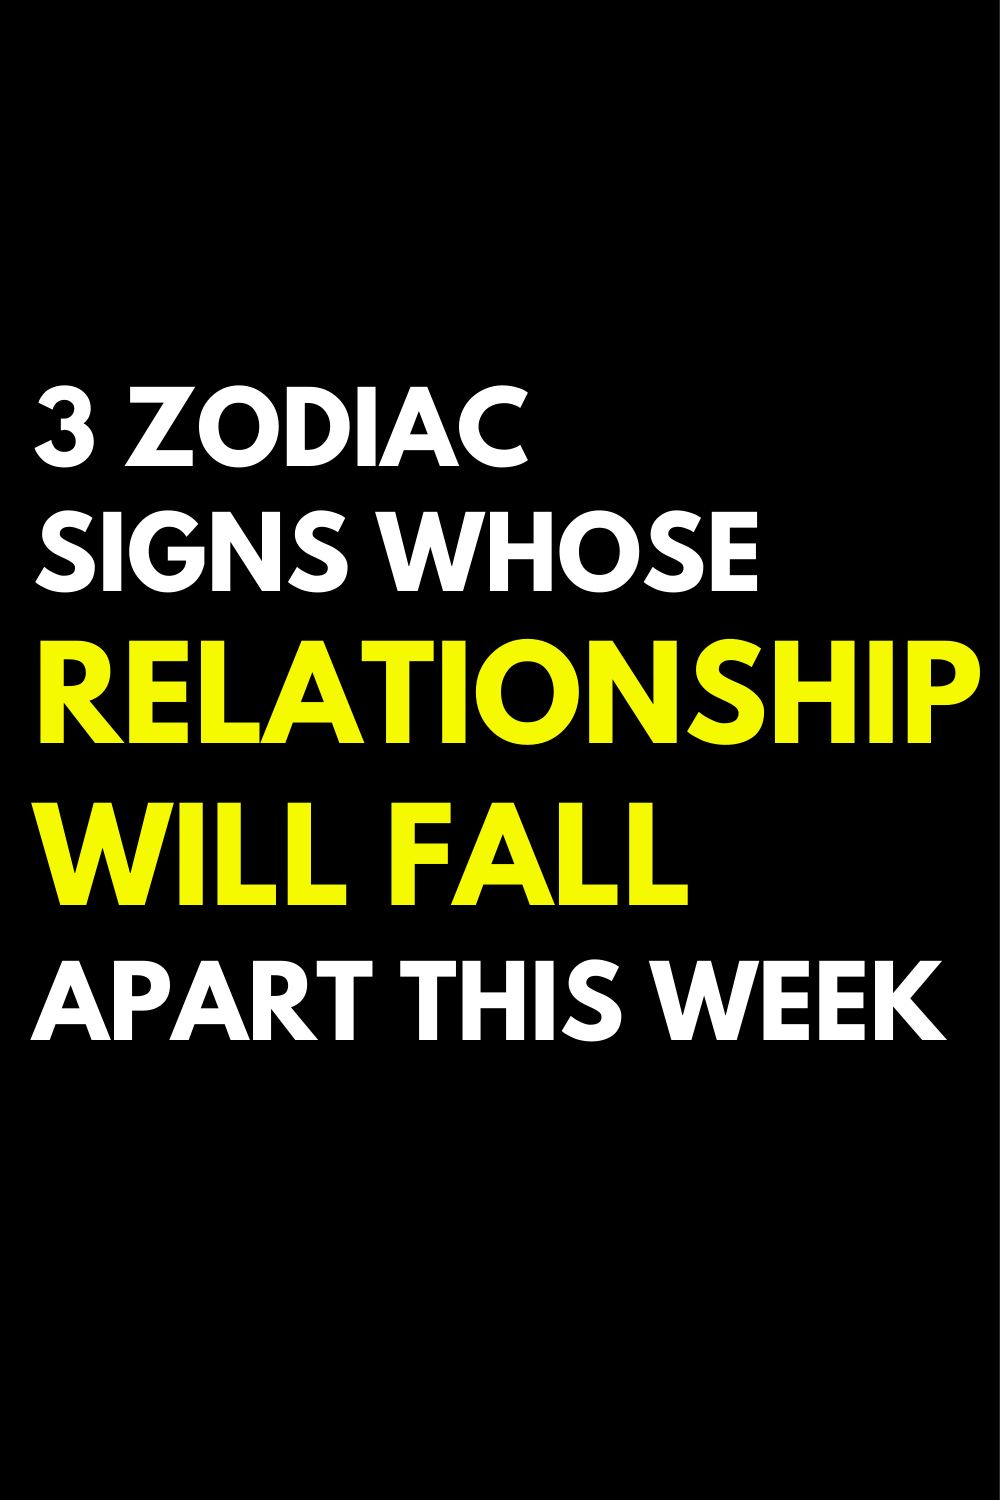 3 zodiac signs whose relationship will fall apart this week